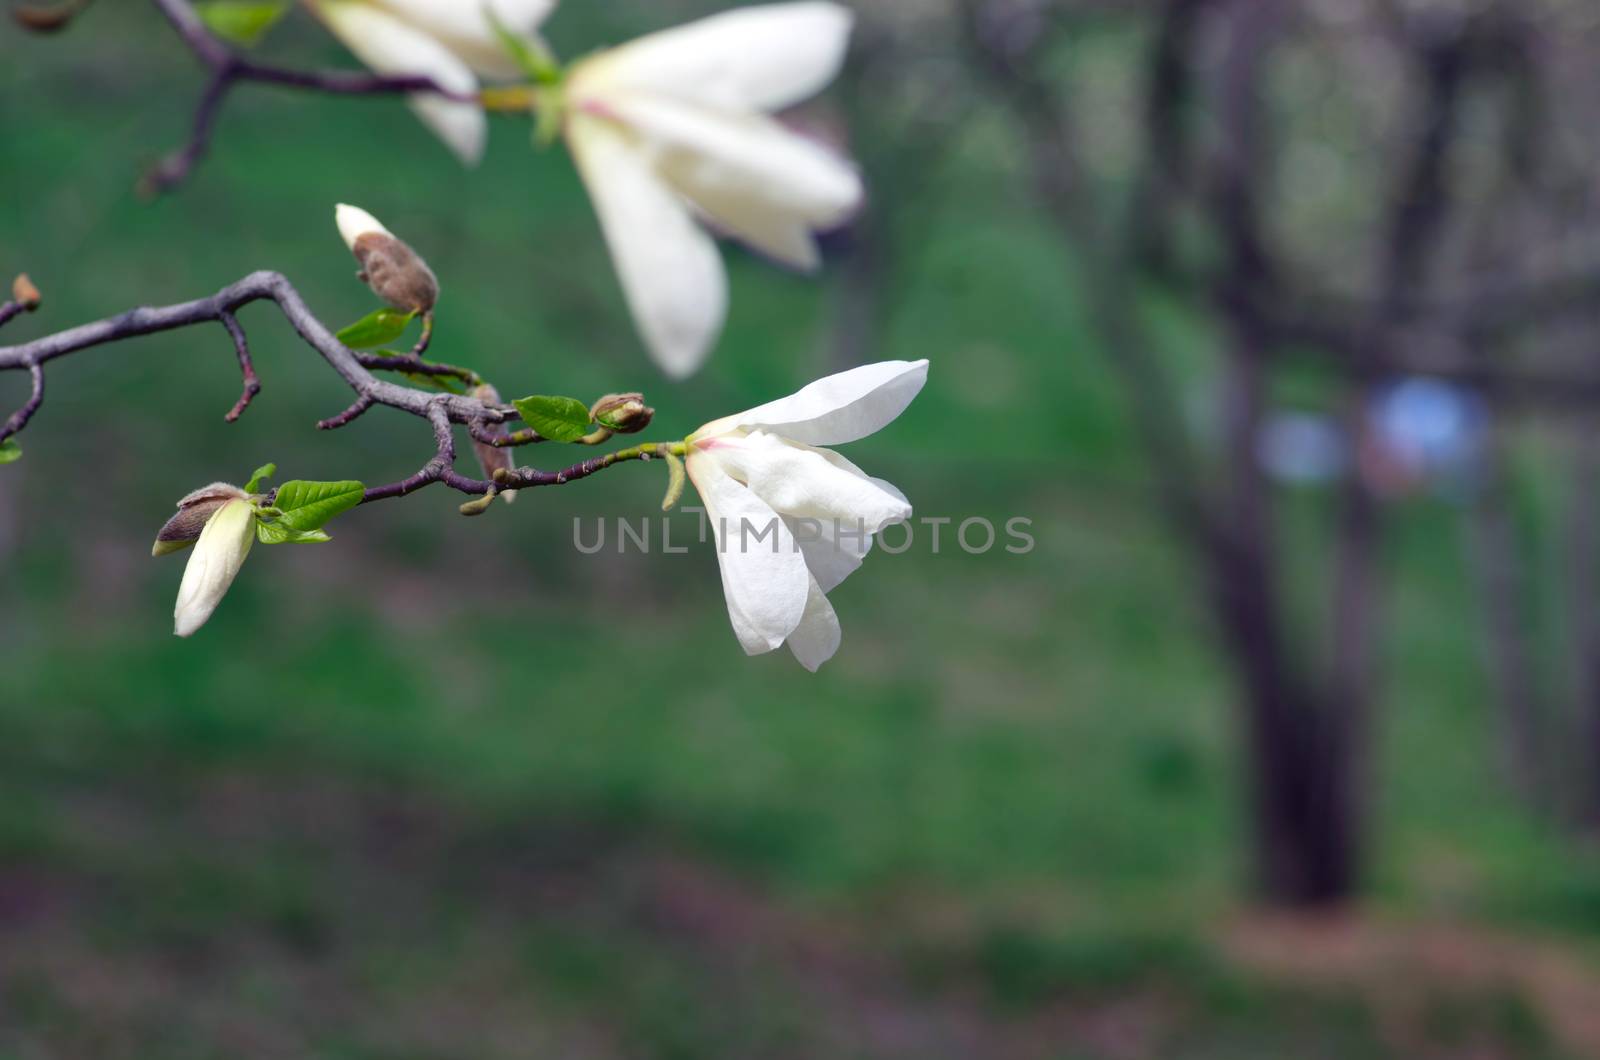 White magnolia flower against the sky close-up